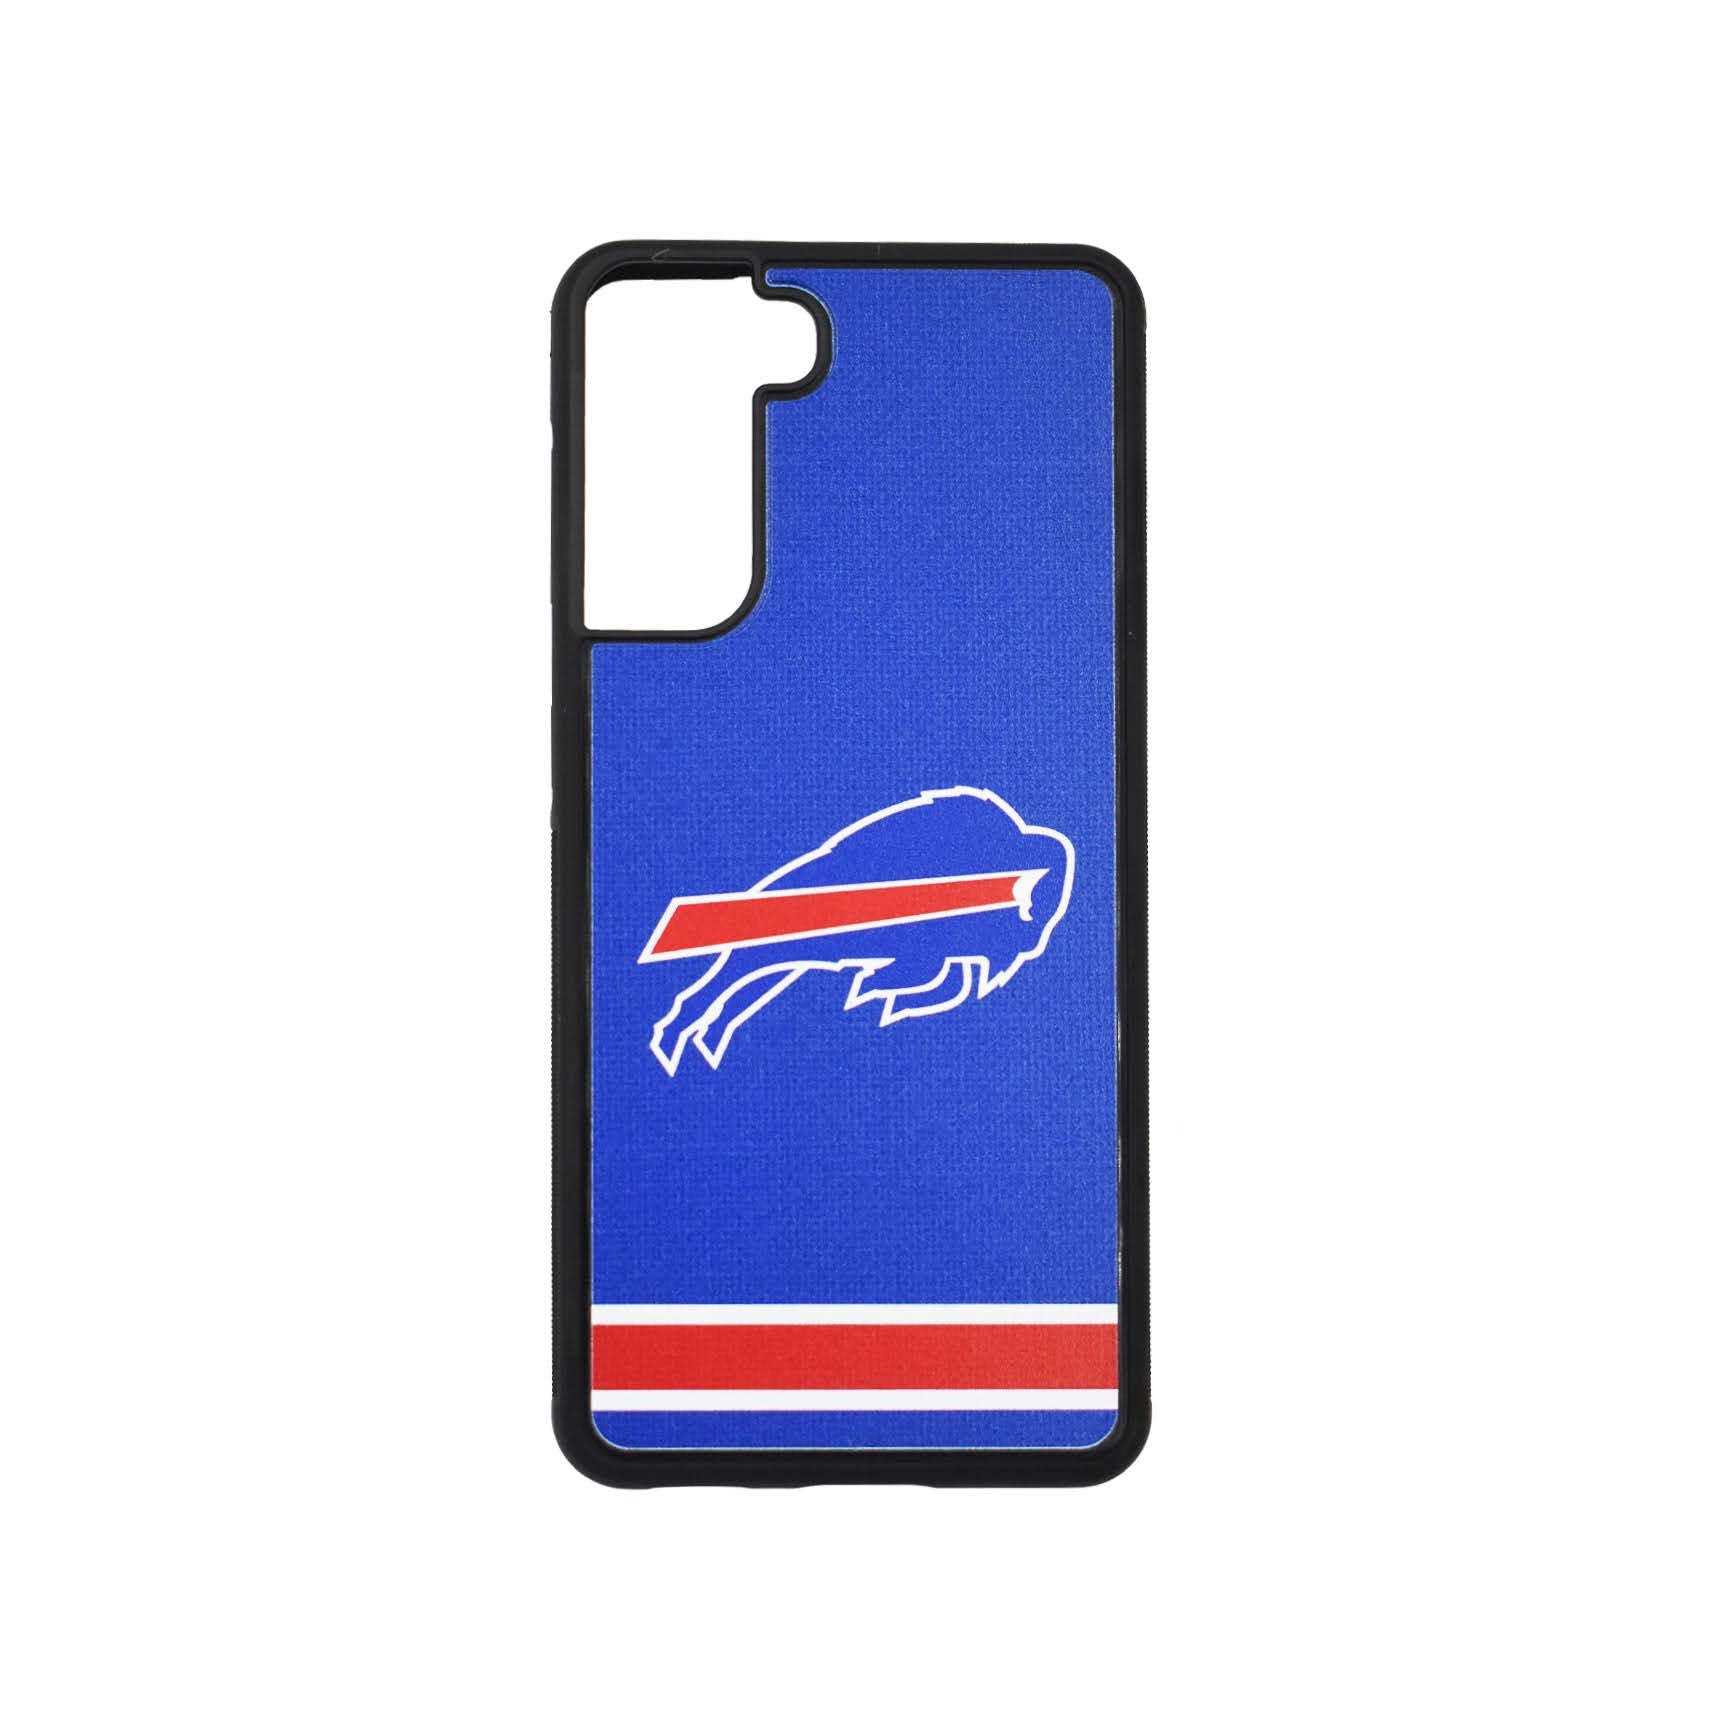 bflo store buffalo bills samsung galaxy royal blue with red strip mobile phone case